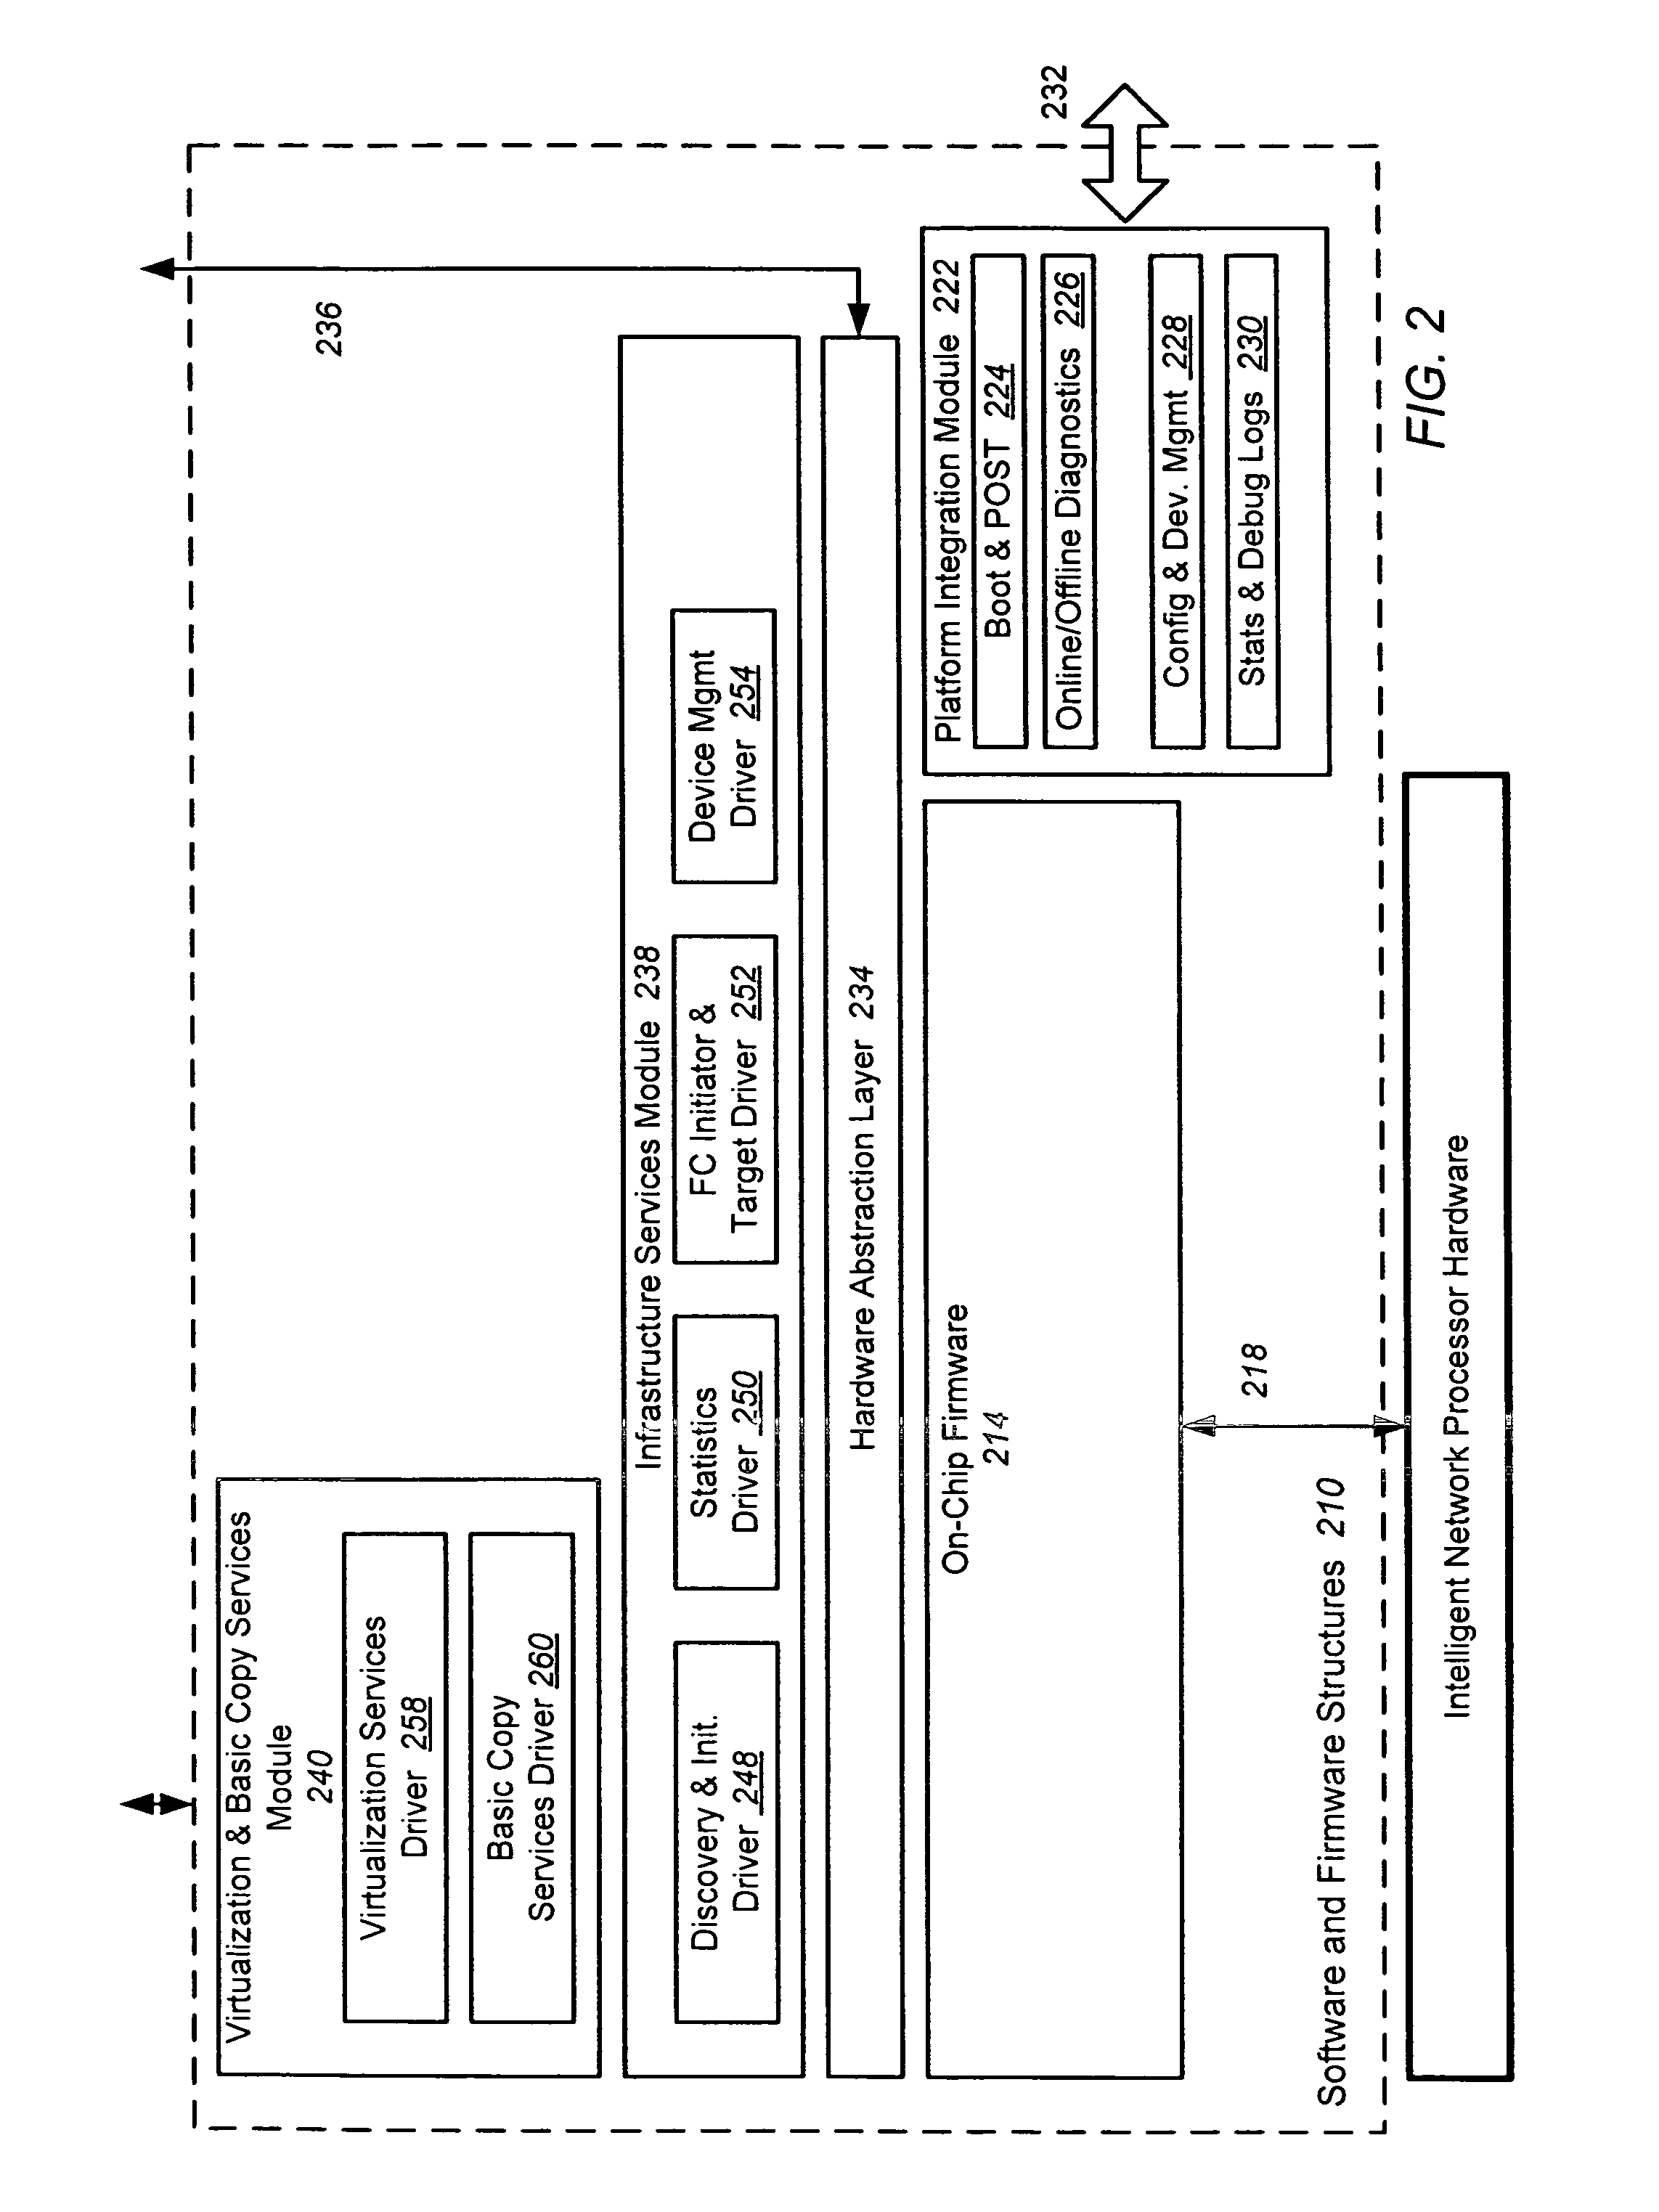 System and method for virtualizing PCIe devices